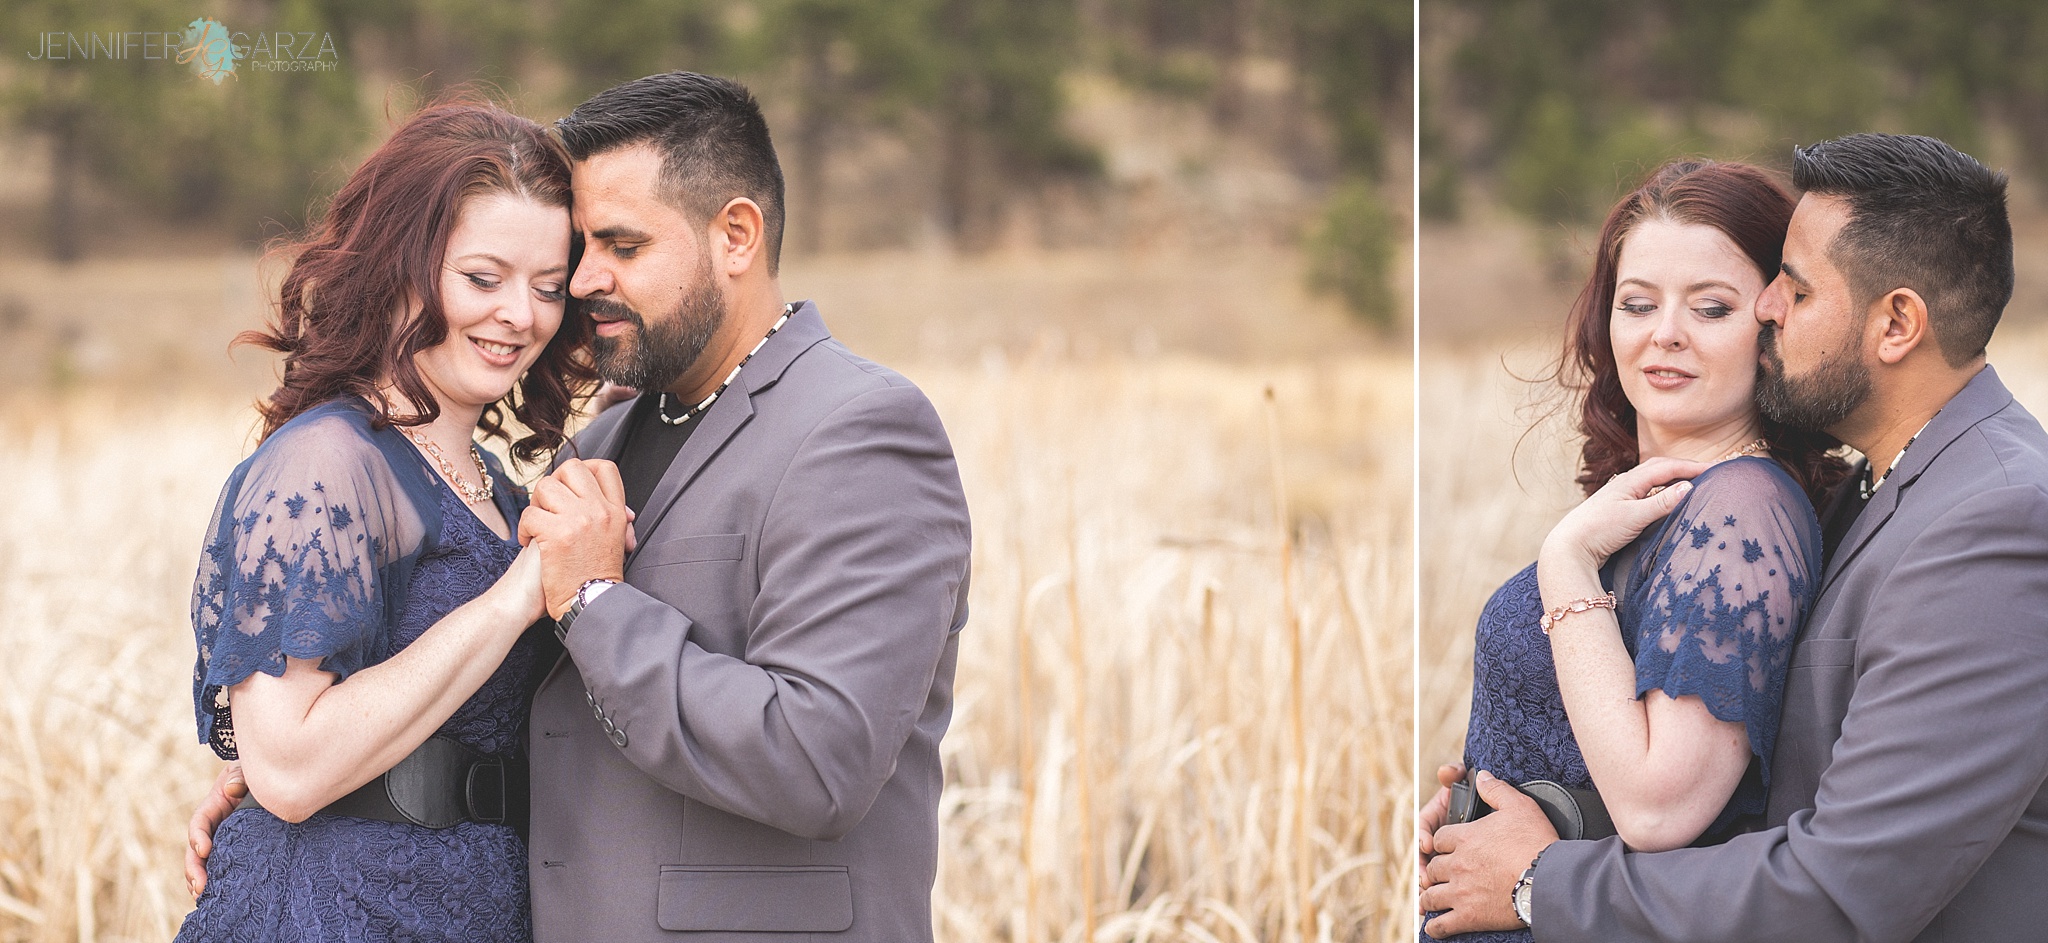 Meave & Victor were so sweet together during their Epic Engagement Shoot at Evergreen Lake House.